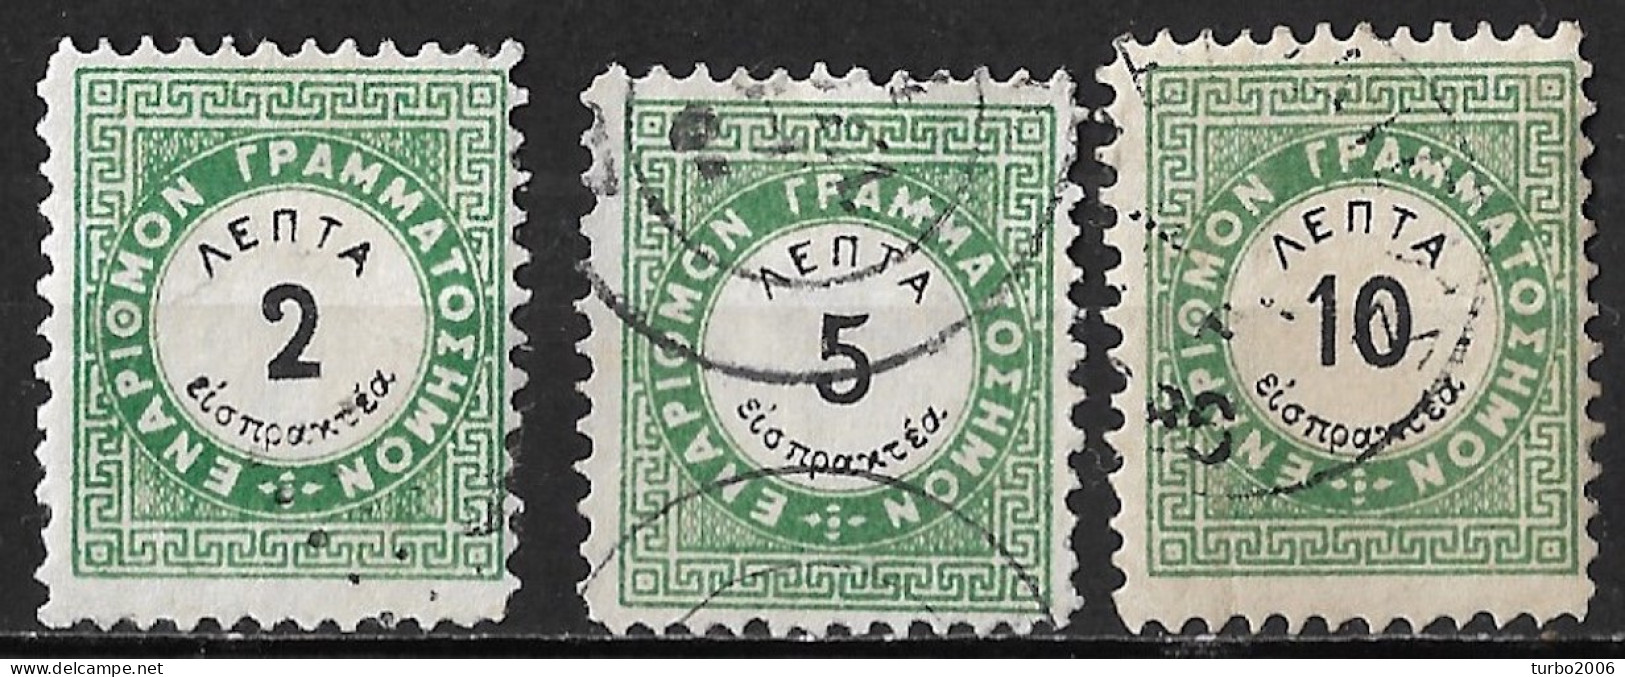 GREECE 1875 Postage Due Vienna Issue I Small Capitals 2-5-10 L. Green / Black Perforation 10½ Vl. D 2 A - D 3 A - D 4 A - Usati